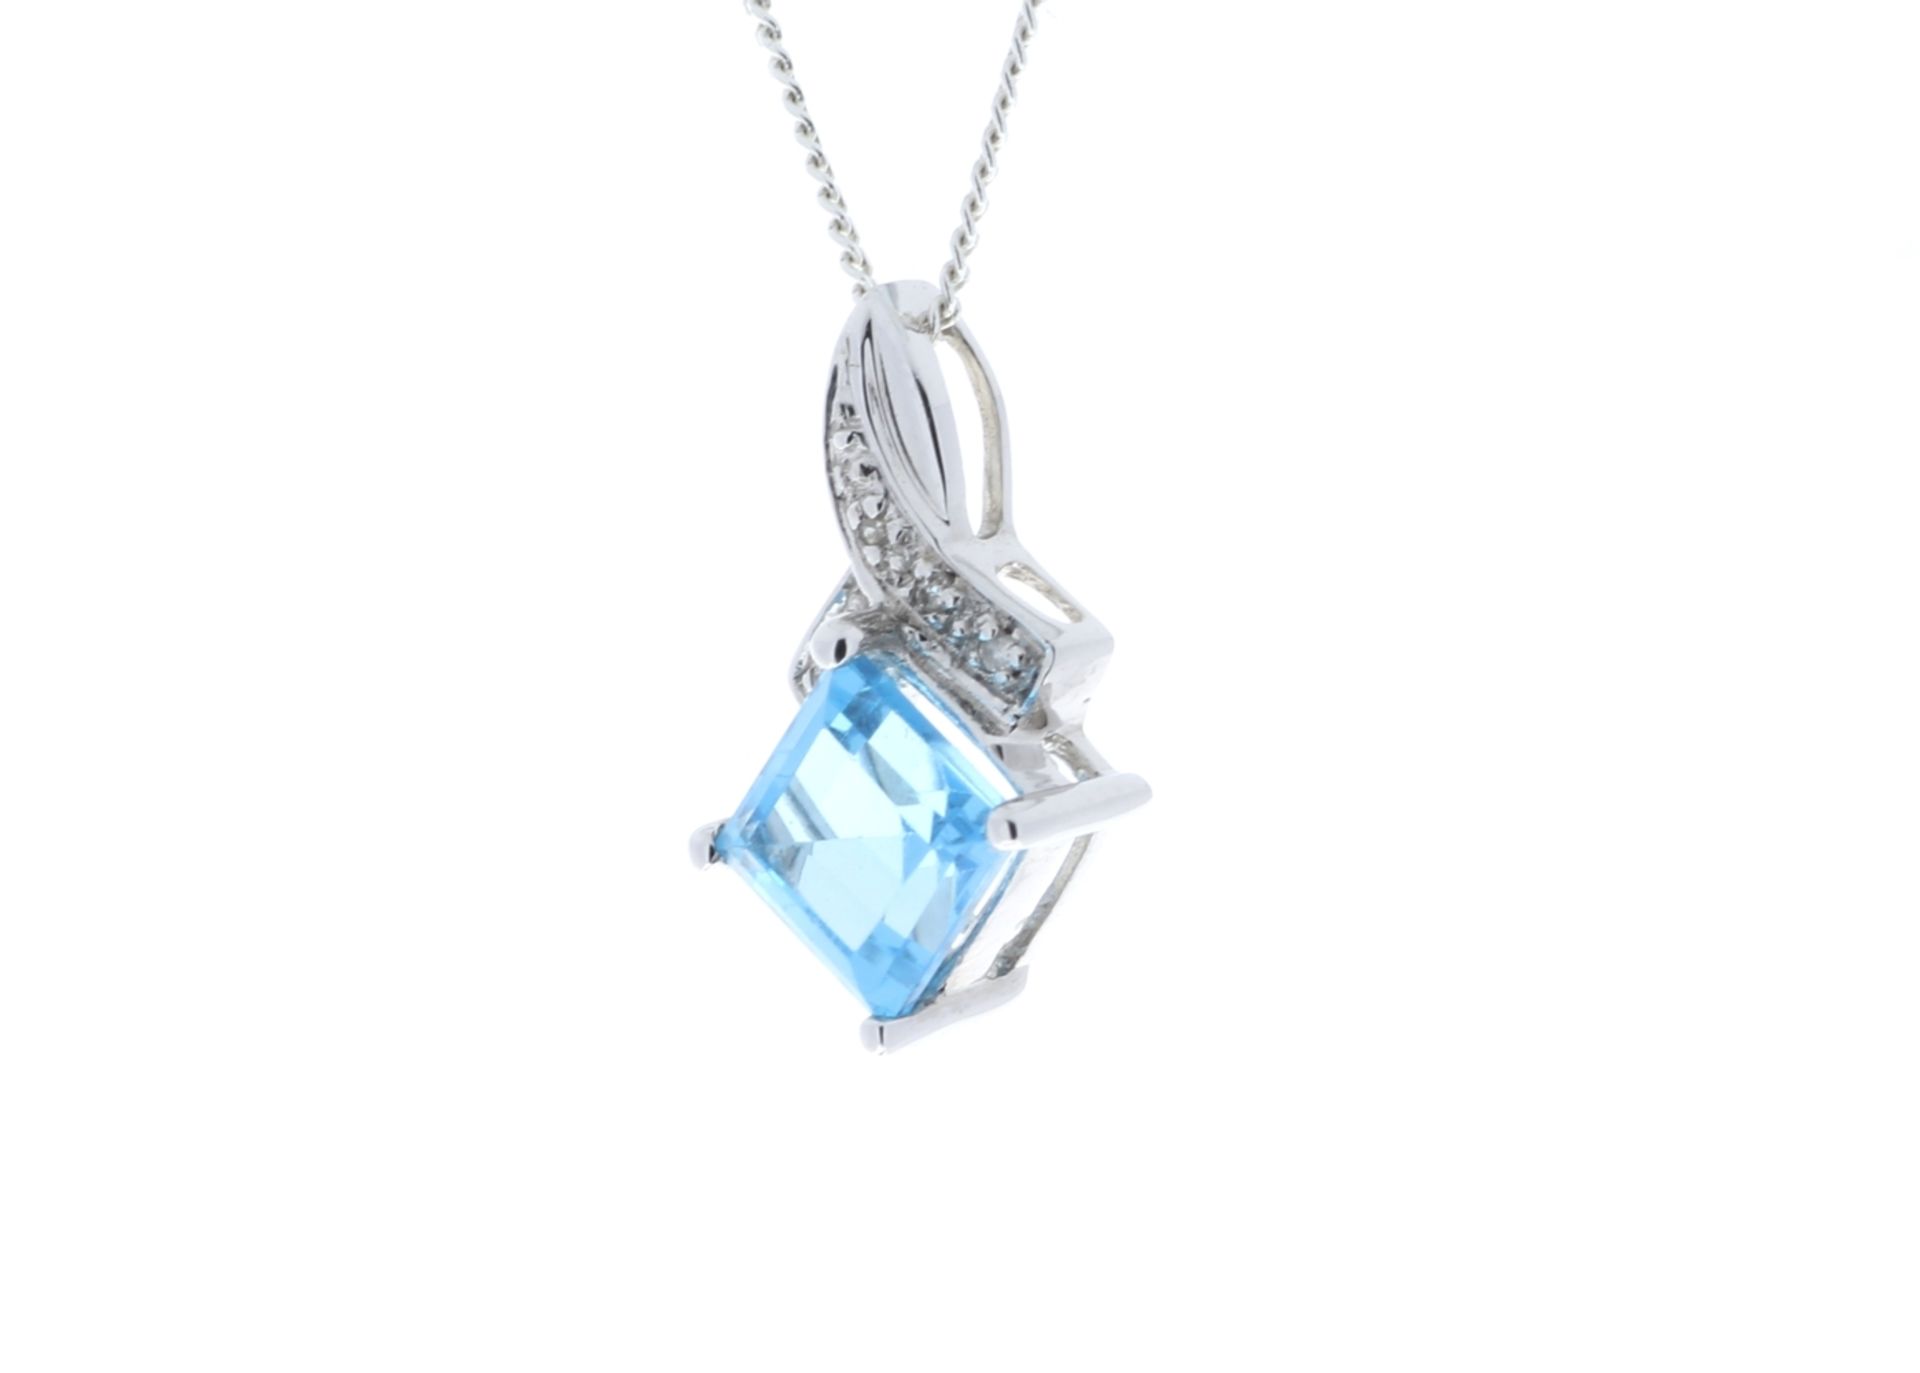 9ct White Gold Diamond And Blue Topaz Pendant (BT1.29) 0.02 Carats - Valued By GIE £760.00 - One - Image 4 of 6